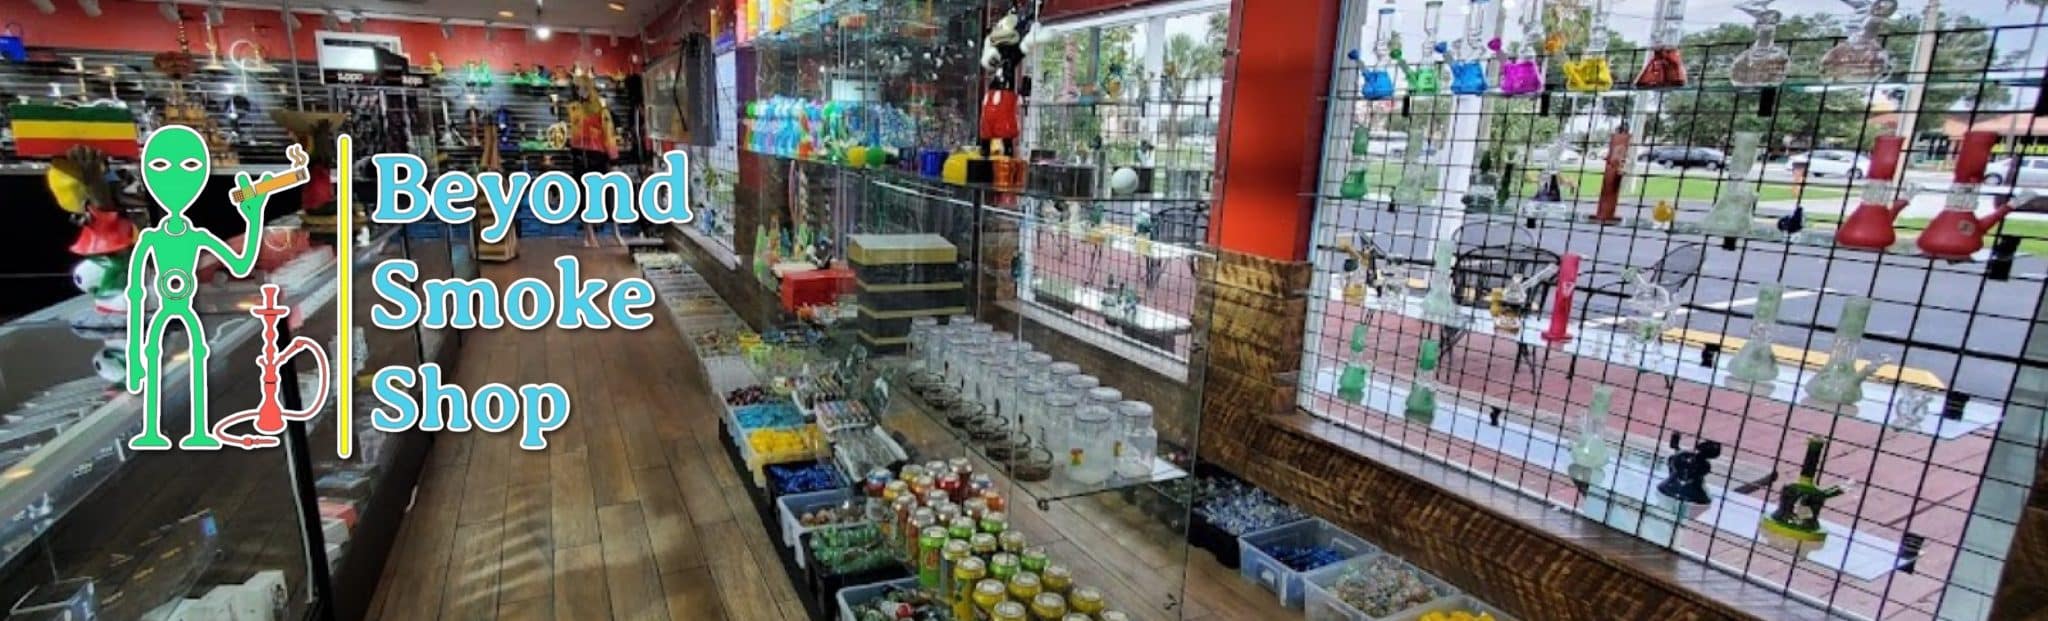 image of beyond smoke shop in kissimmee fl